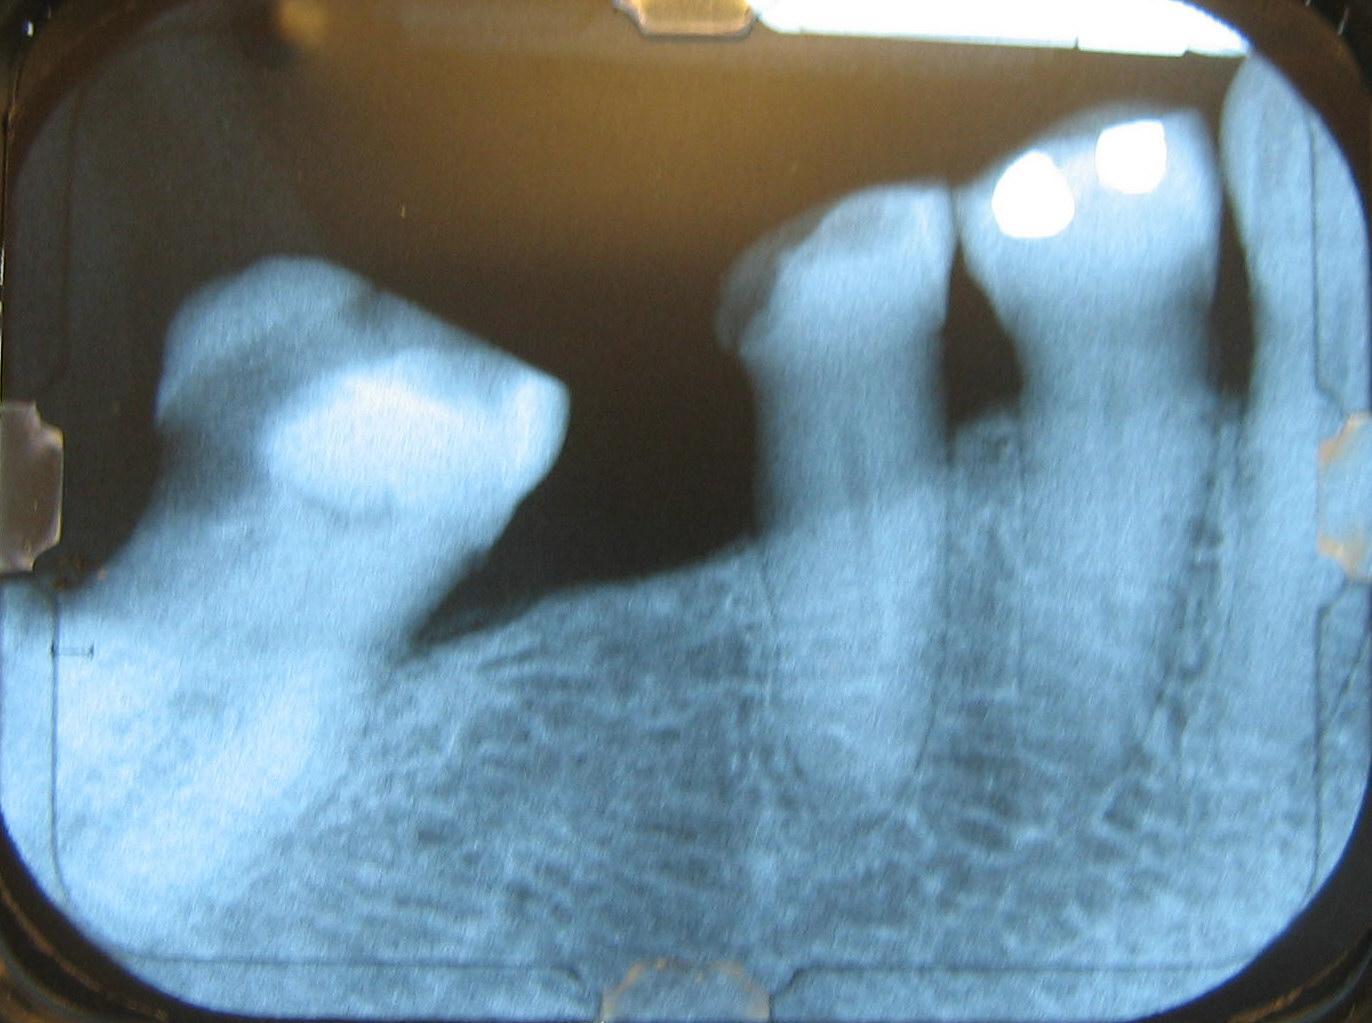 This X-ray film reveals some bone loss in the lower right mandible. The associated teeth exhibit poor crown-to-root ratios and may be subject to secondary occlusal trauma.